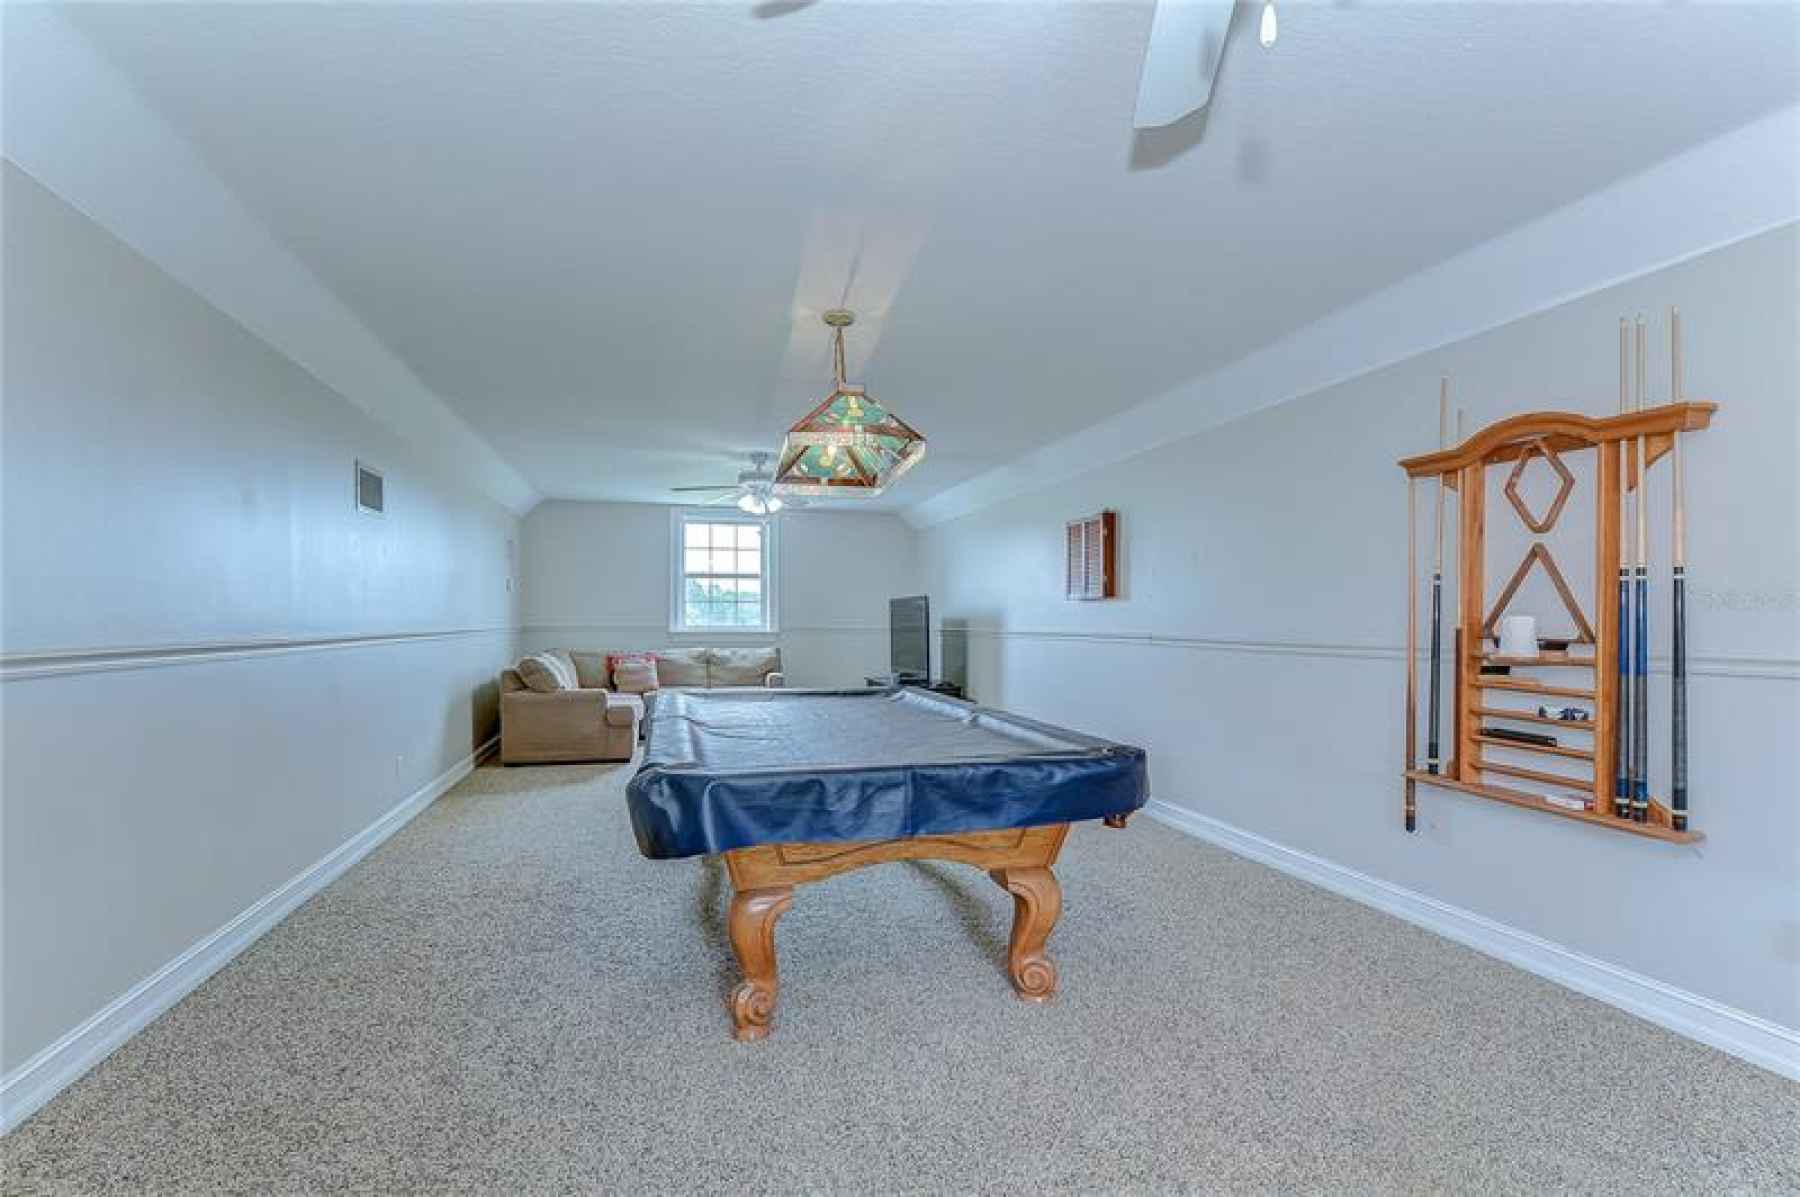 This bonus room is so overly sized!